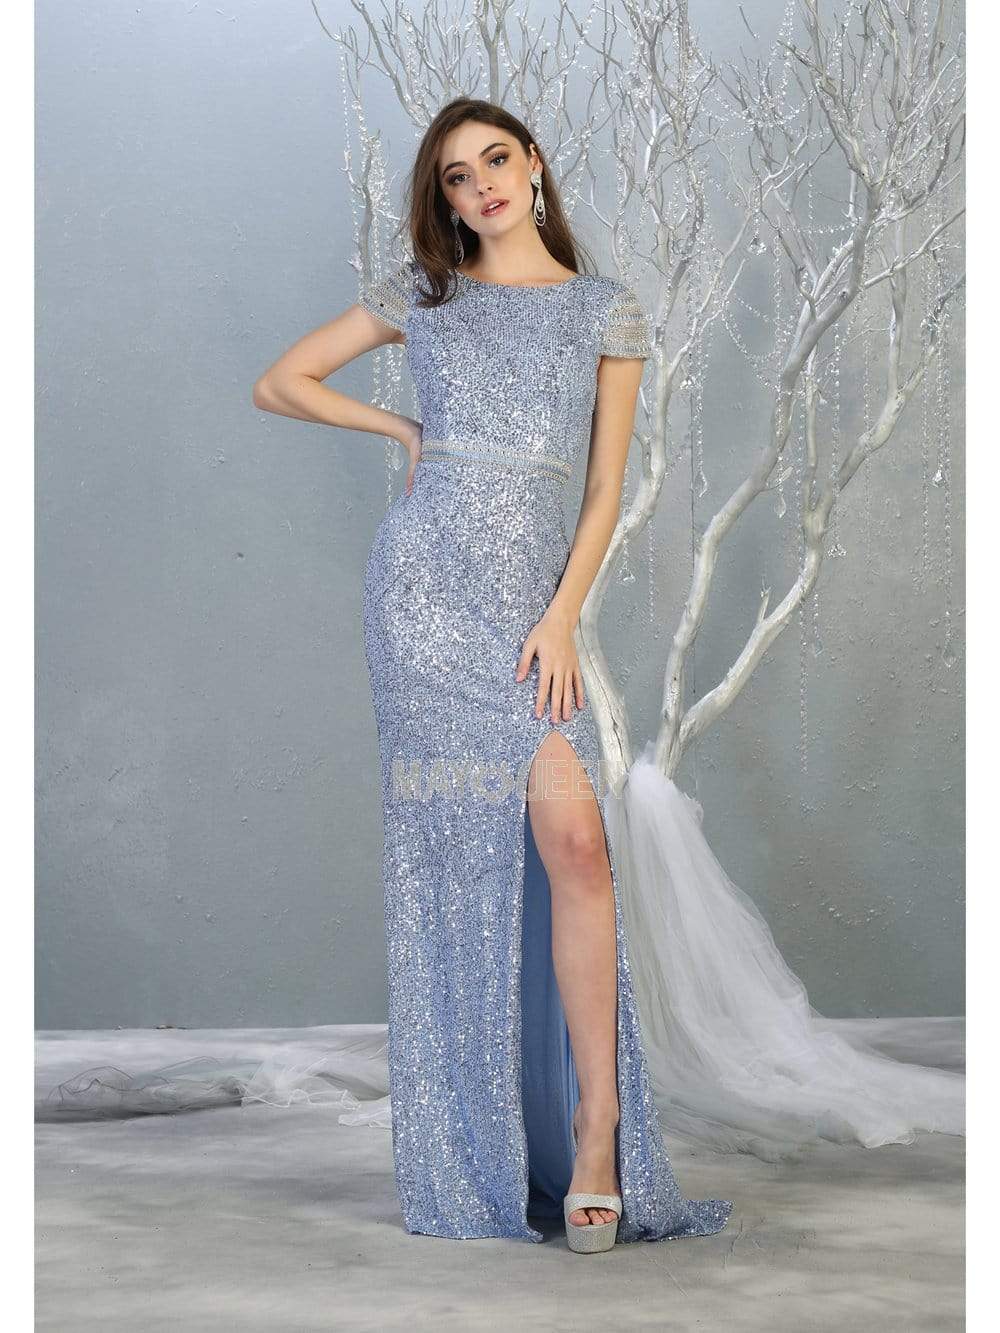 May Queen - RQ7848 Bateau Evening Gown with Slit Evening Dresses 4 / Dusty-Blue